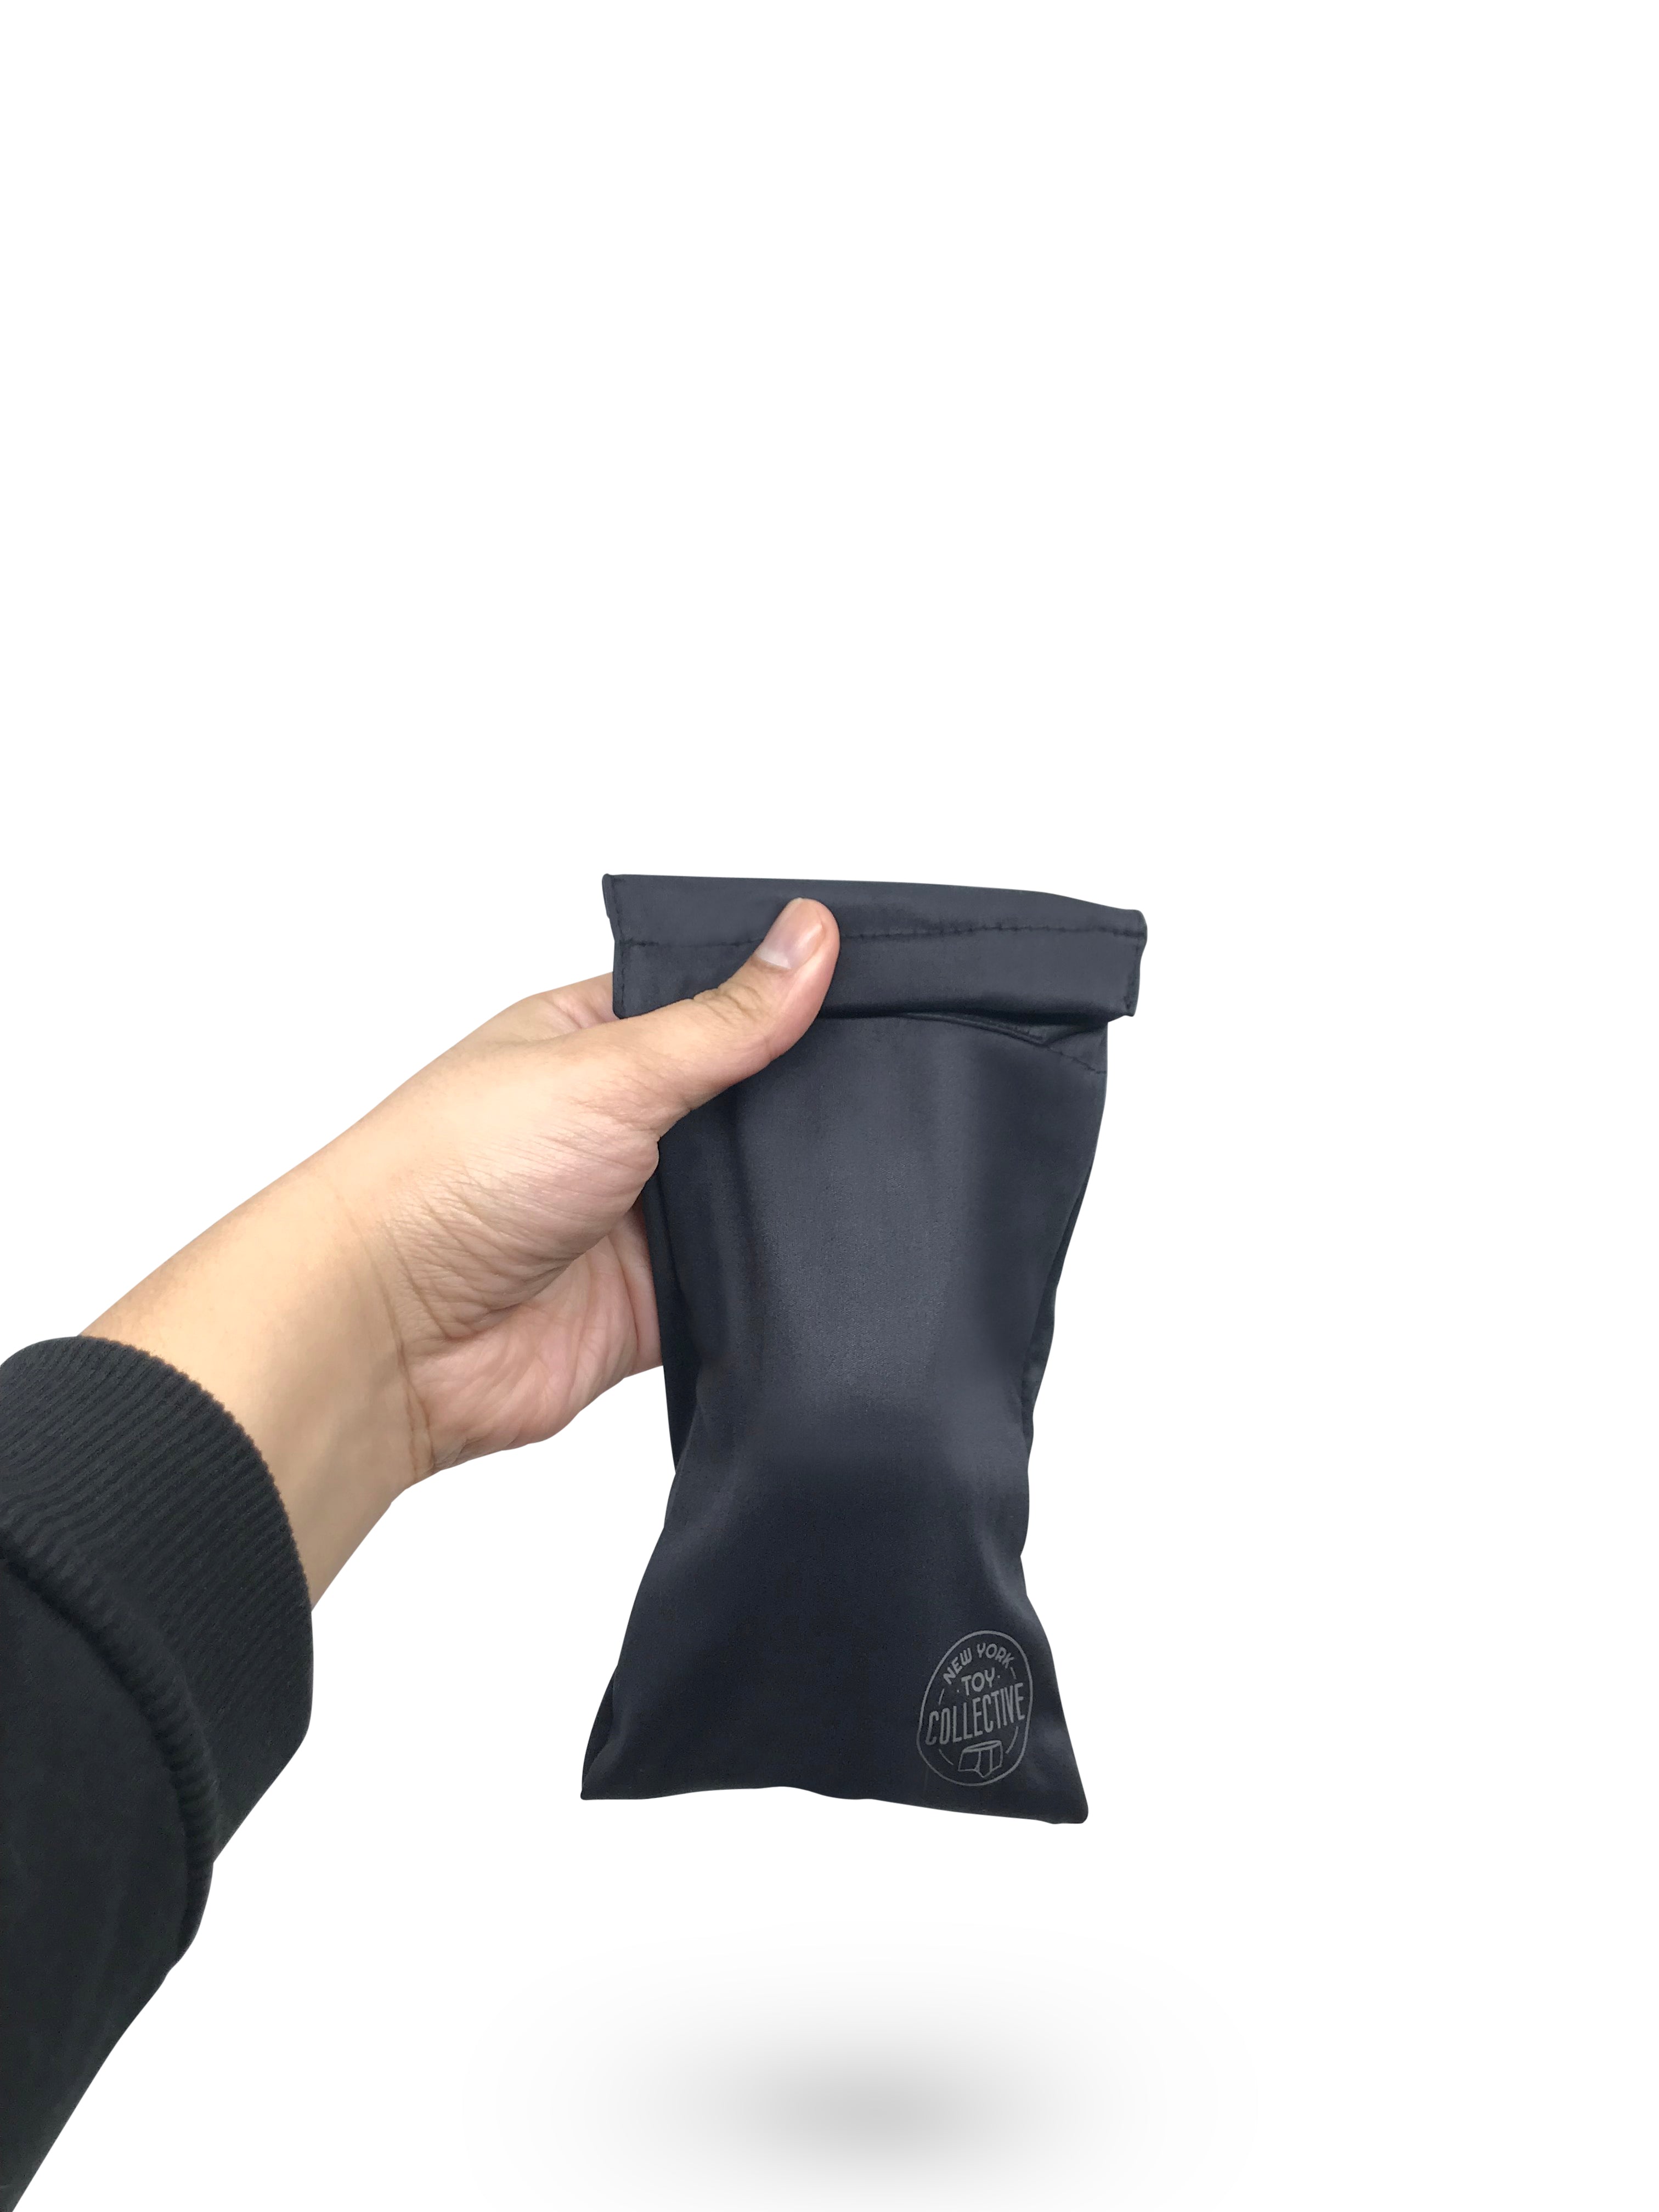 Black packing pouch with packer inside, being held by a hand